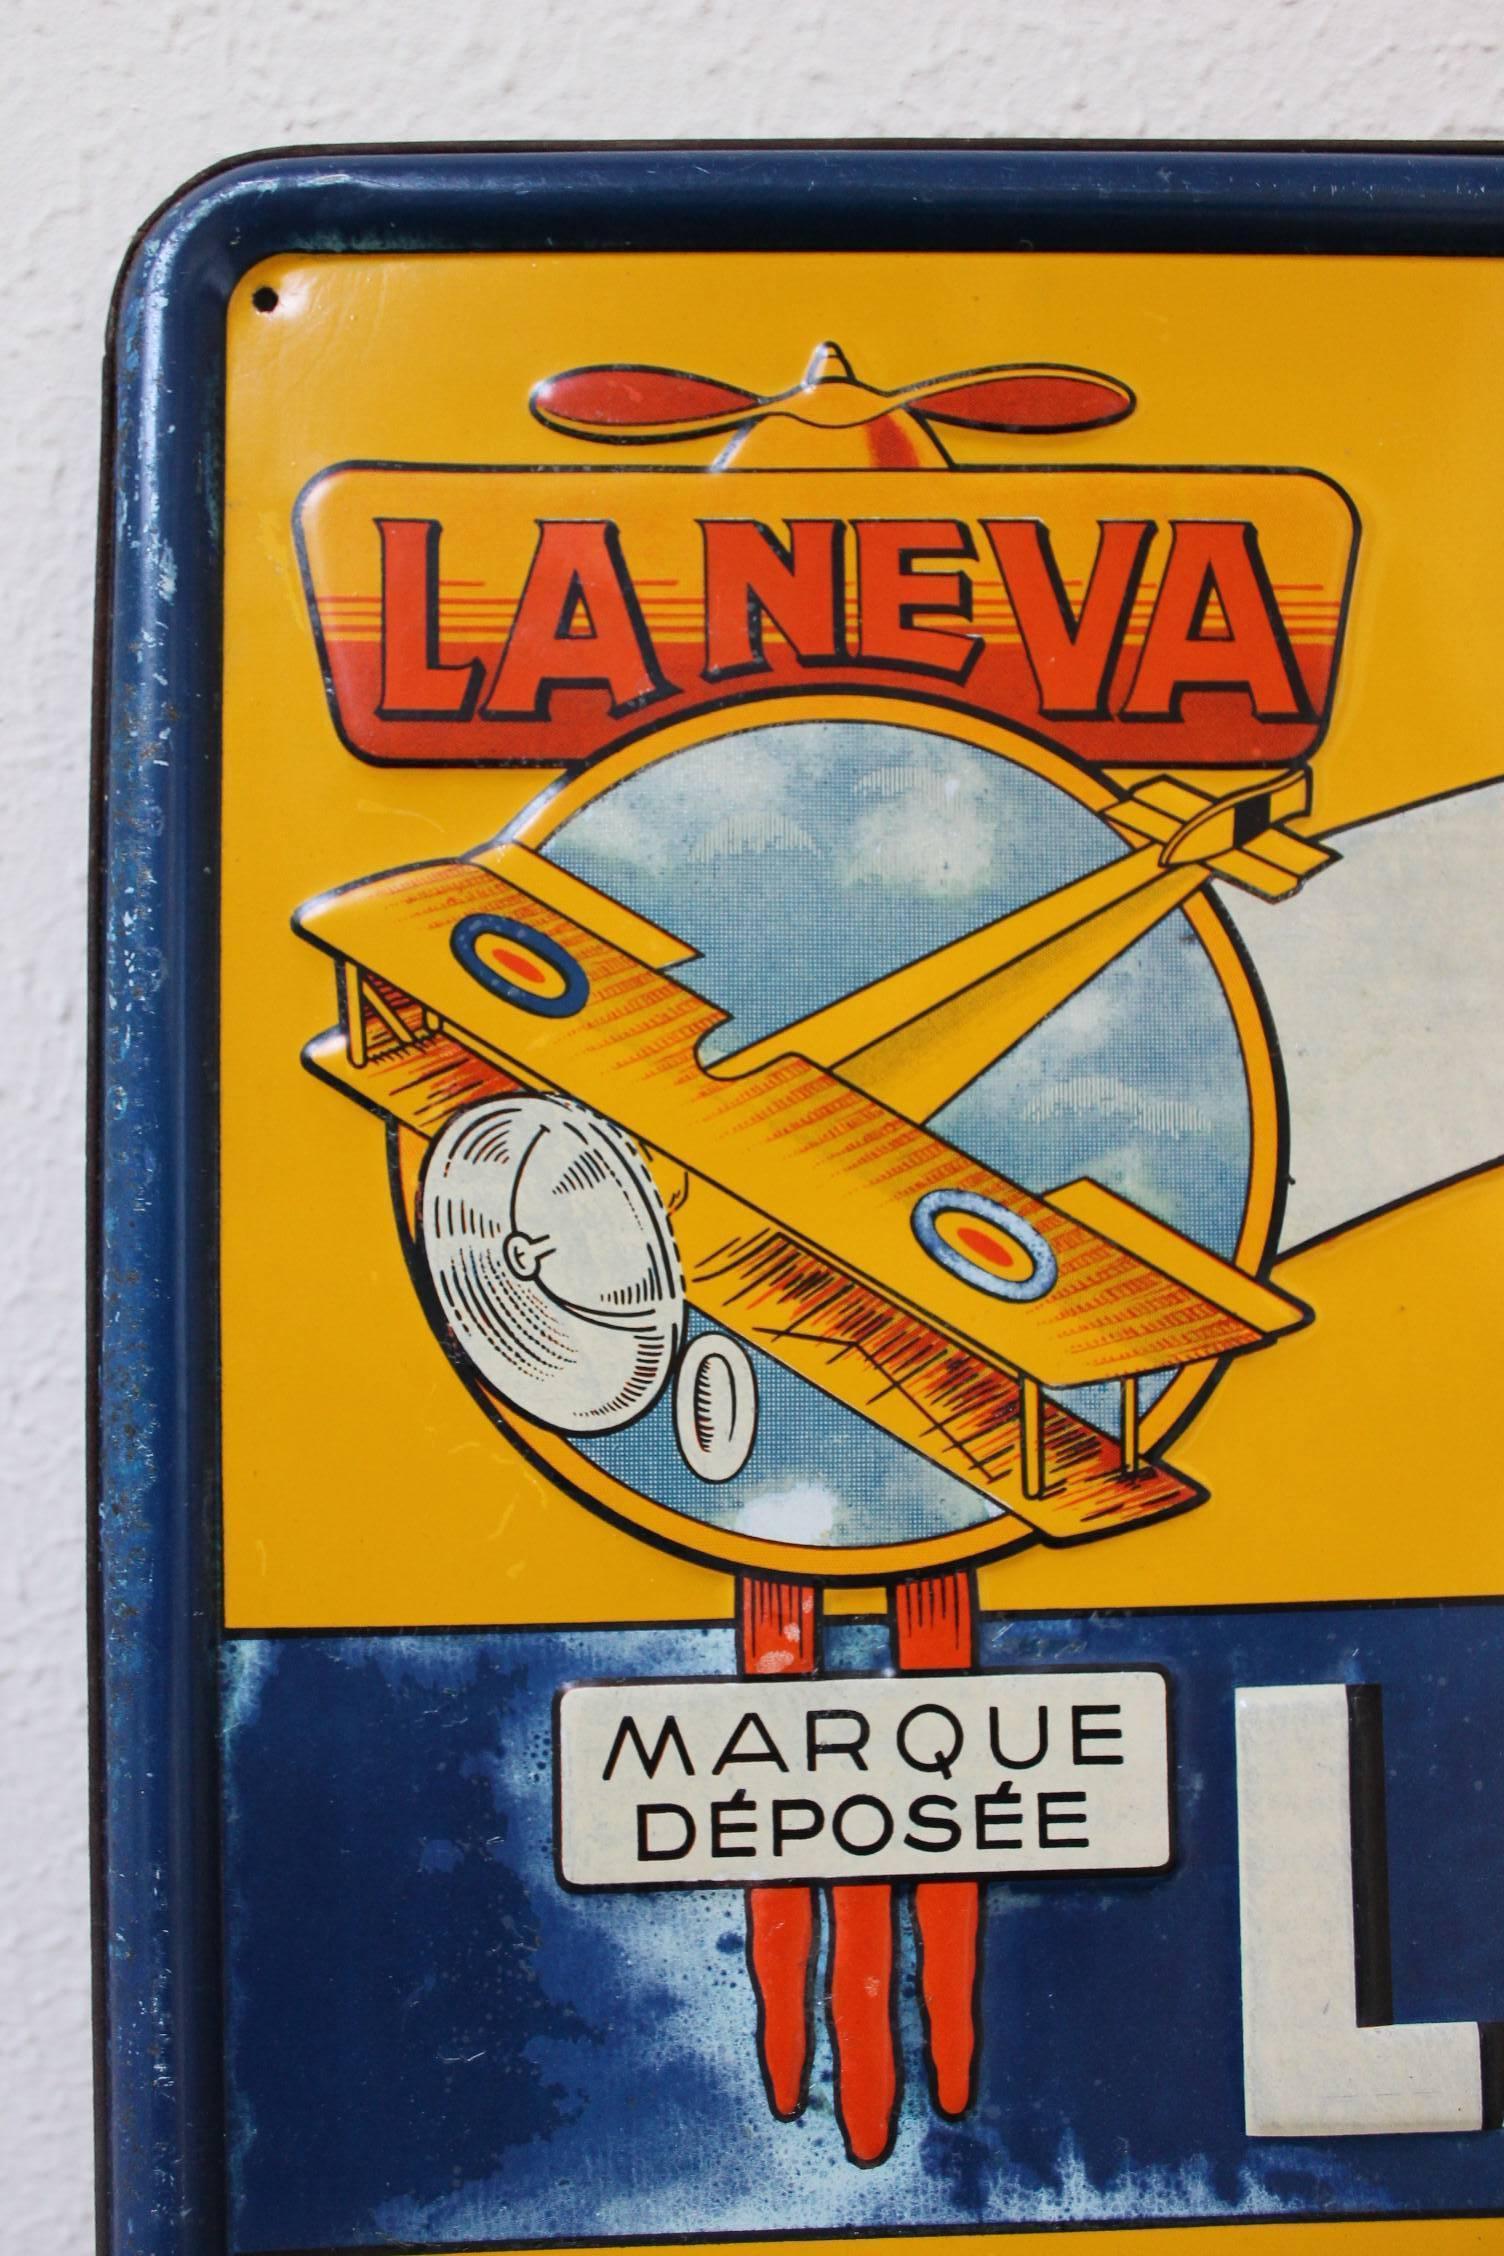 Very rare Litho Publicity Display Sign in Metal for La Neva Cycles Agency.
Vintage Tin Advertising Sign of the brothers Depypere for their luxurious edition of Bicycles - bikes called La Neva. It was a small Factory based in Kuurne,